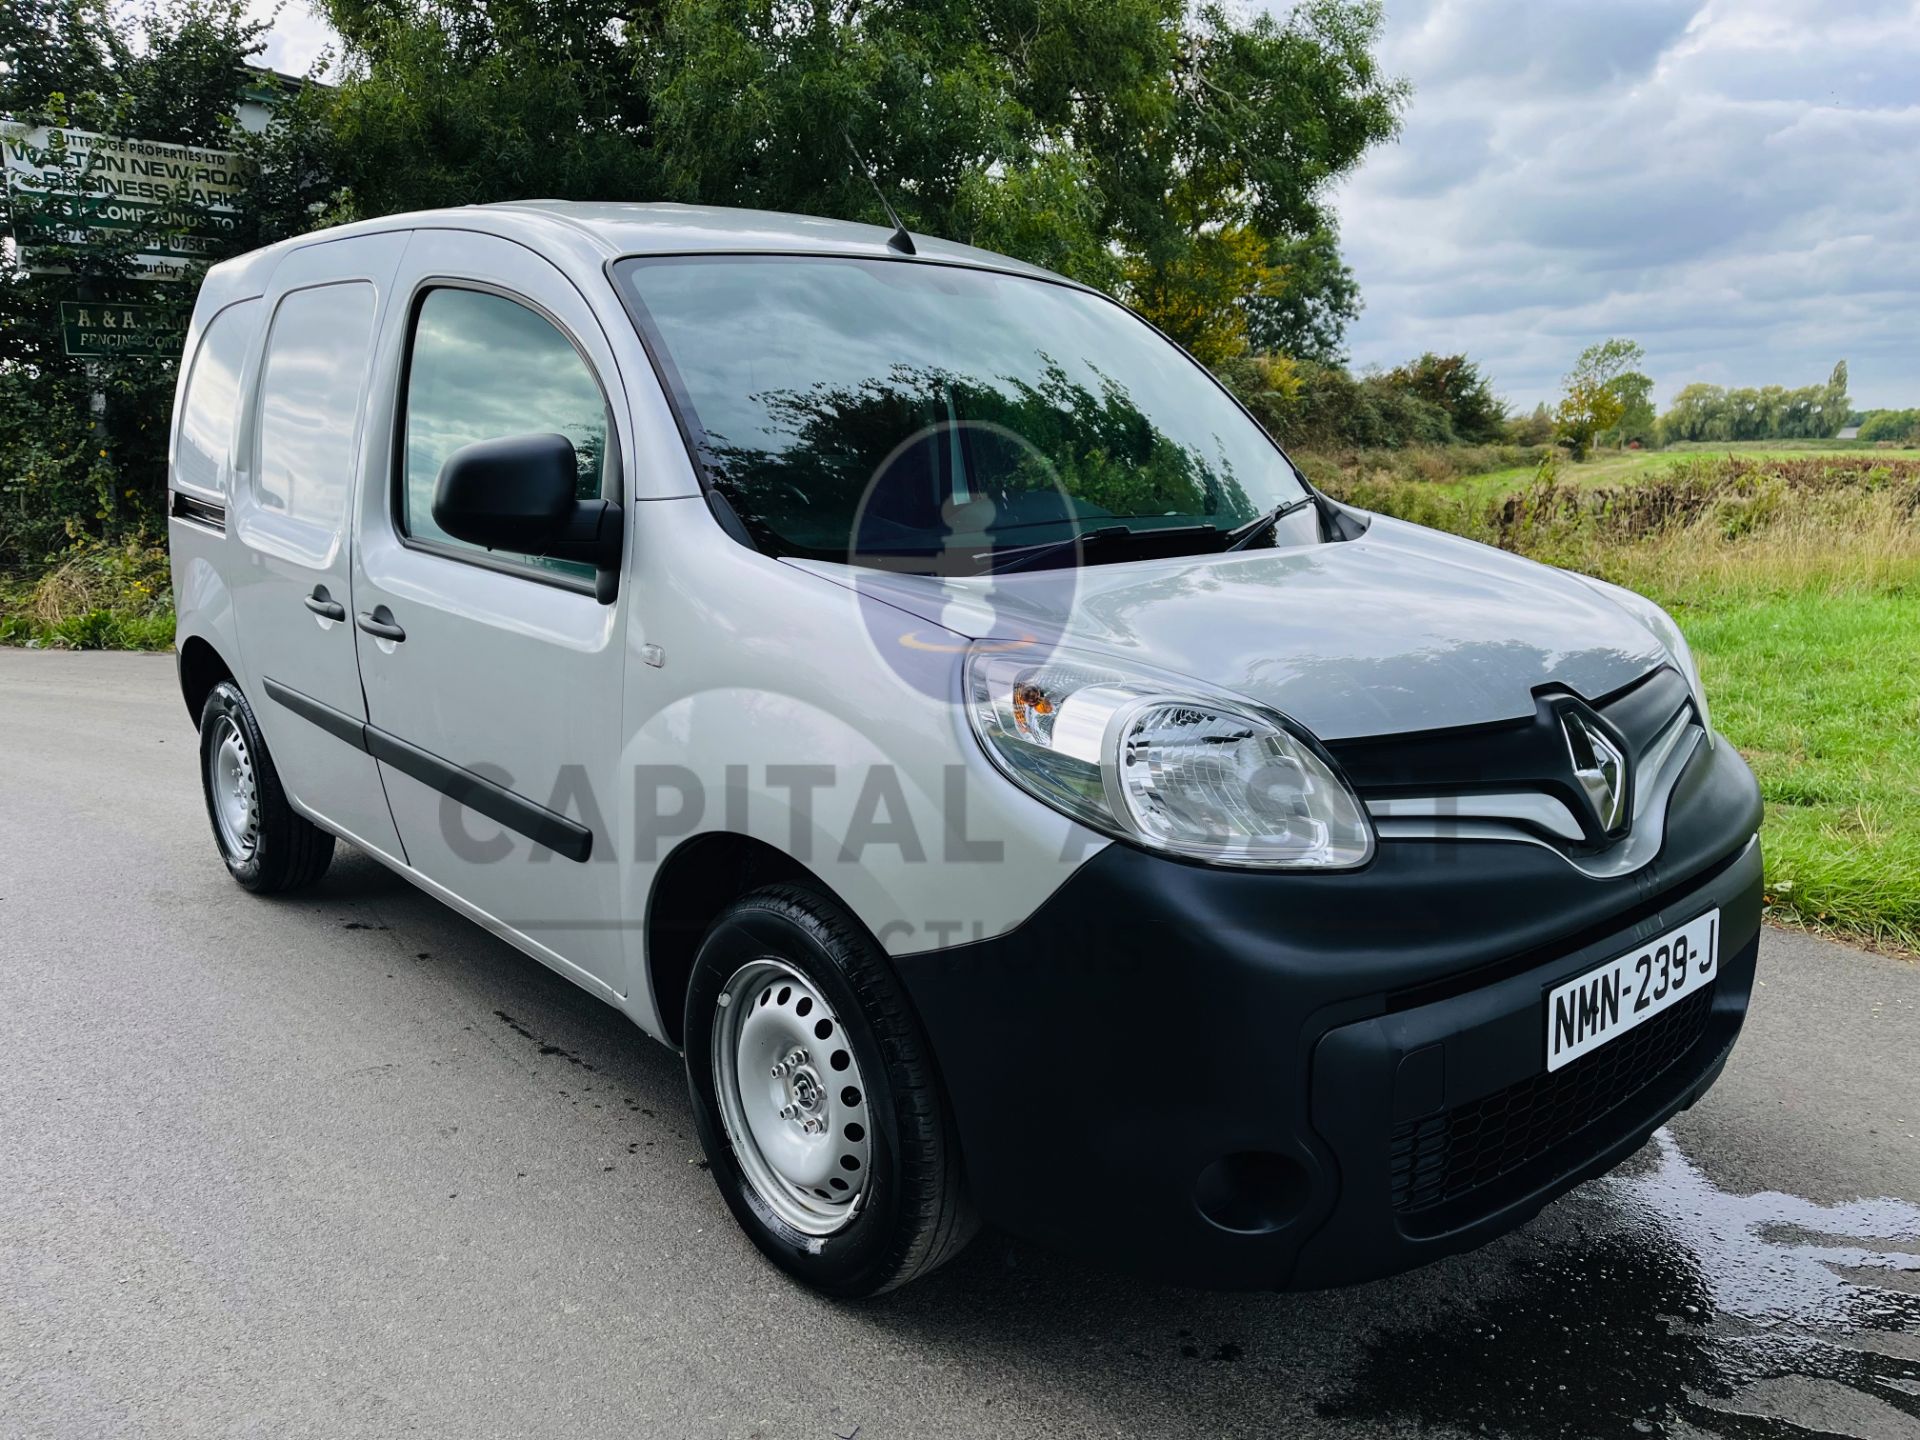 RENAULT KANGOO 1.5DCI "BUSINESS EDITION" (2018) EURO 6 - 6 SPEED - AIR CON - STOP / START -ELEC PACK - Image 3 of 22